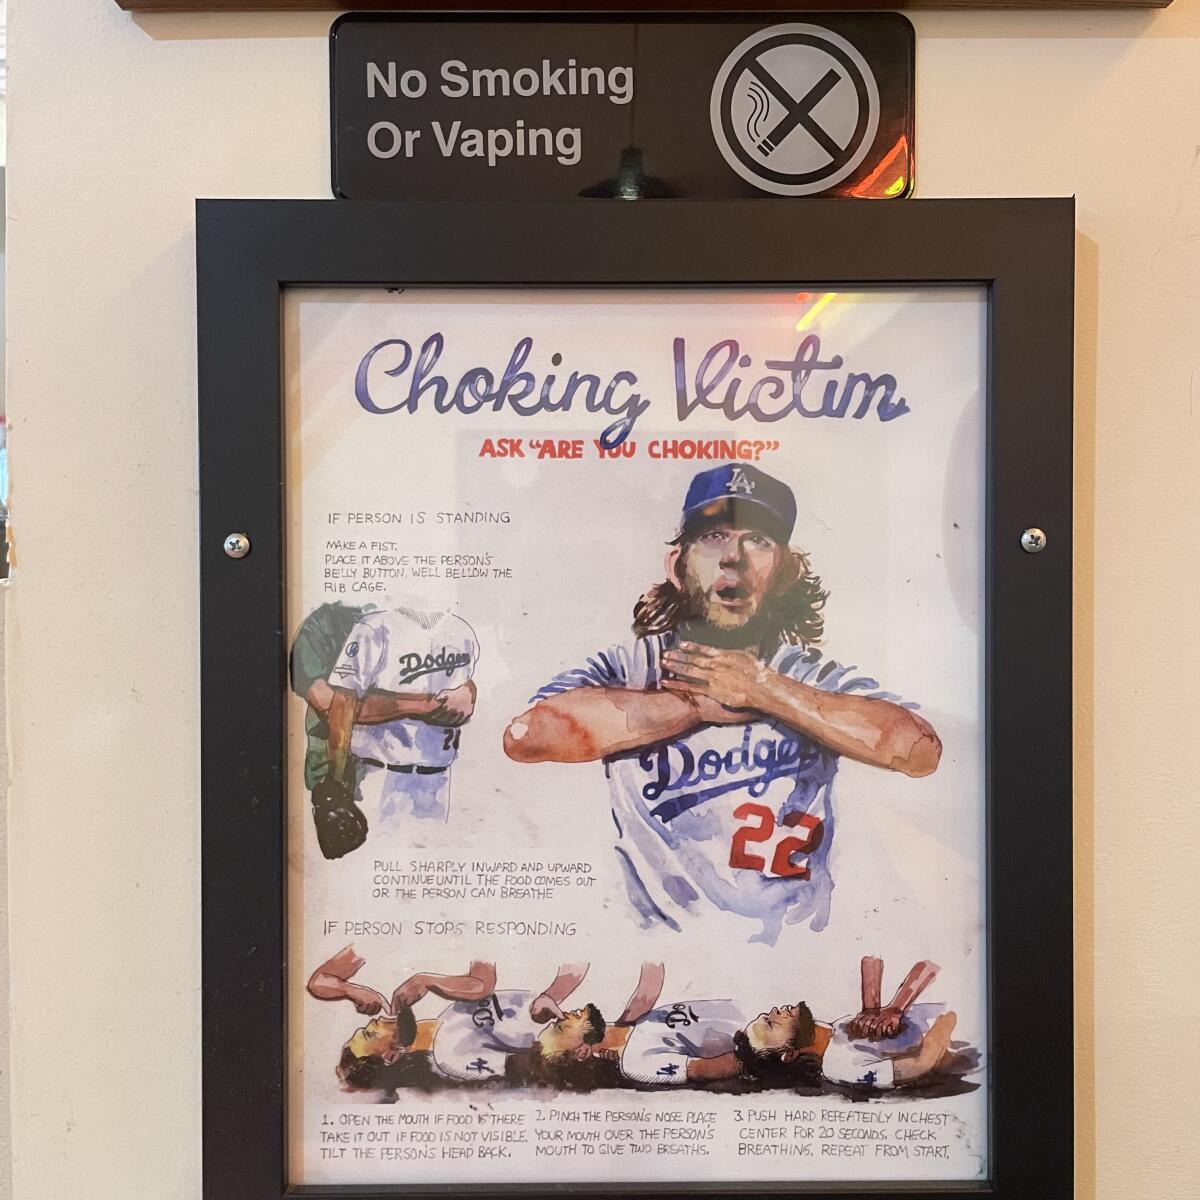 A first aid poster featuring Dodgers pitcher Clayton Kershaw as a choking victim